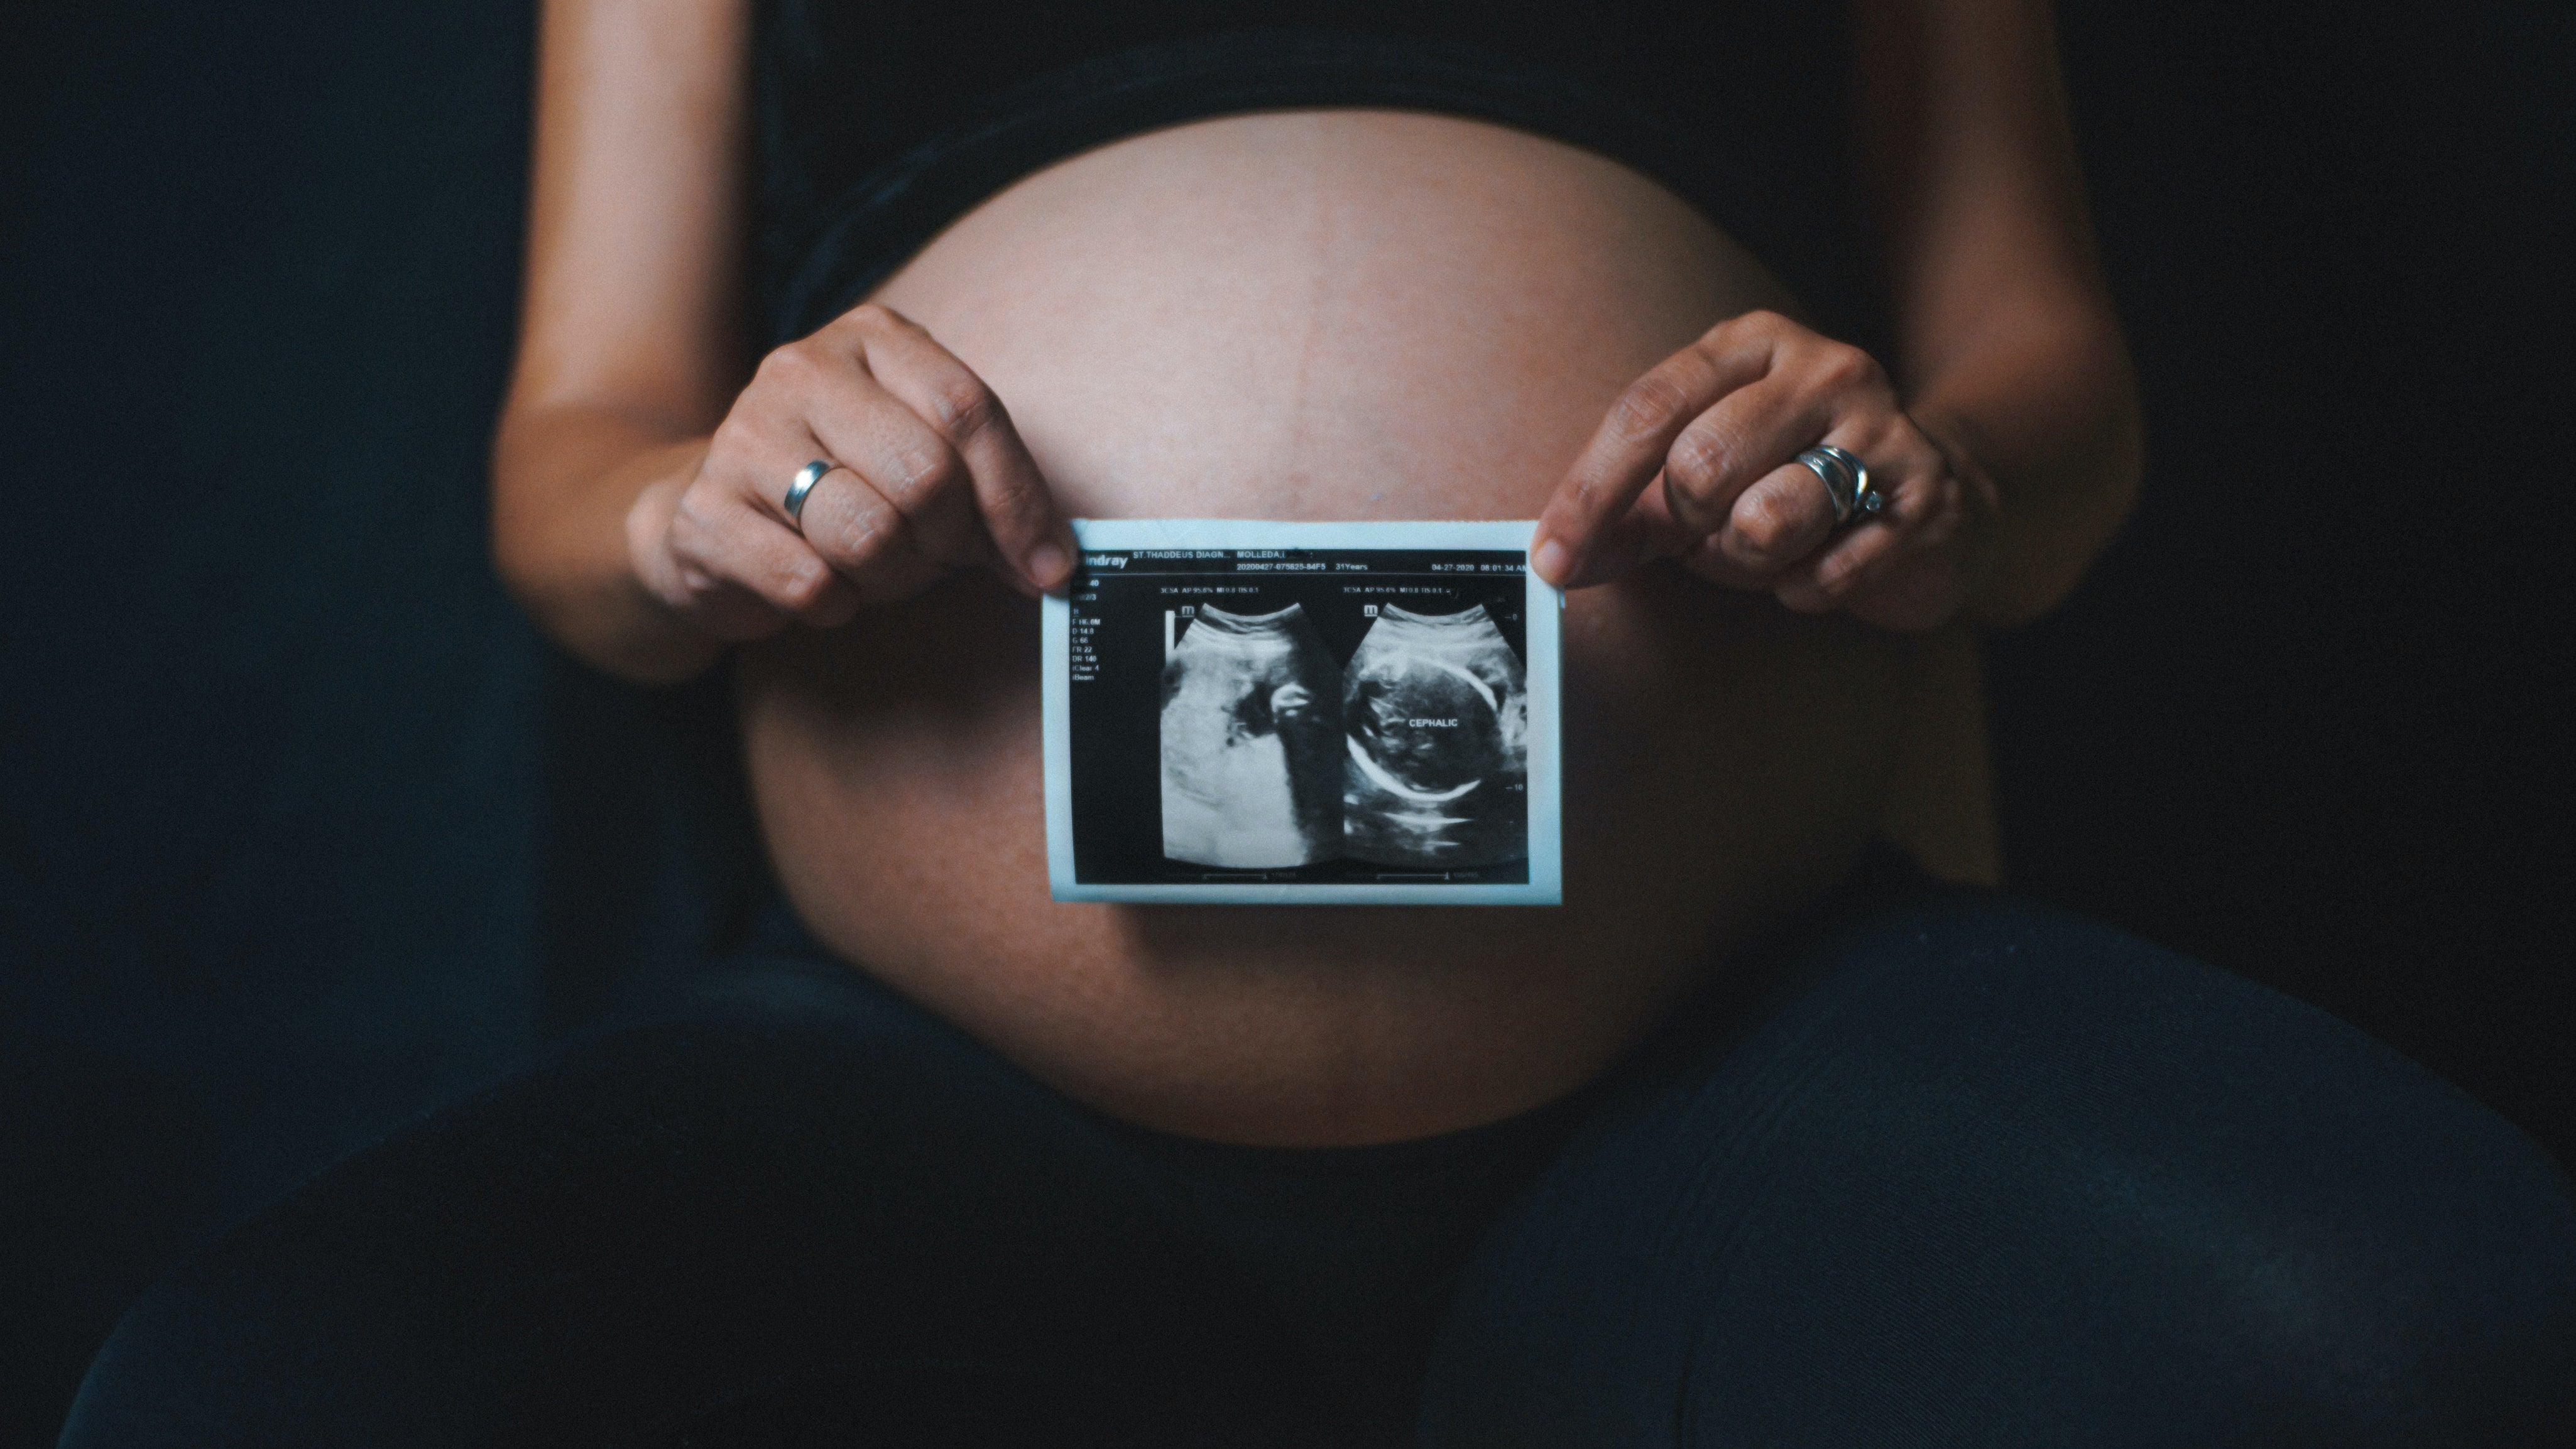 Obstetrician vs Gynaecologist: What's The Difference?